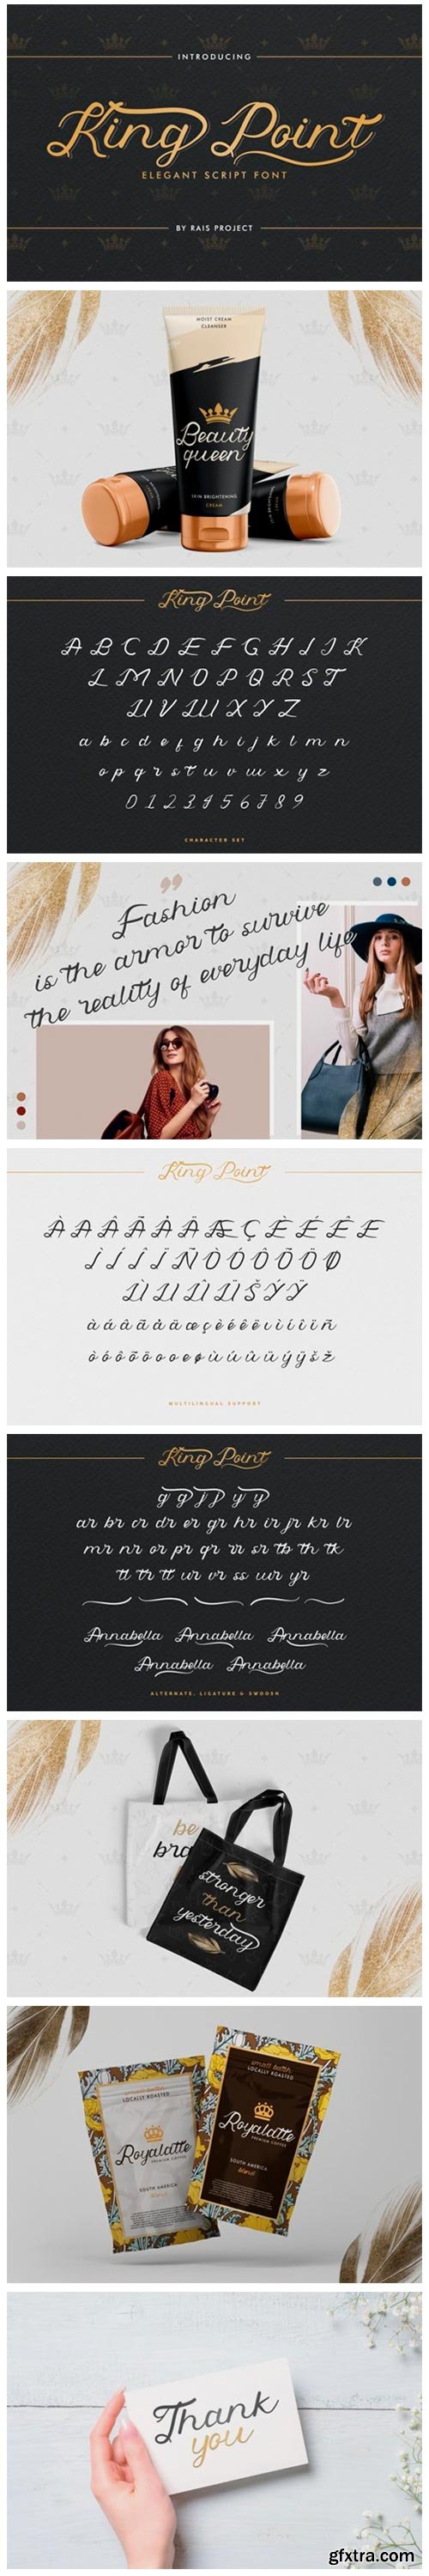 King Point Font